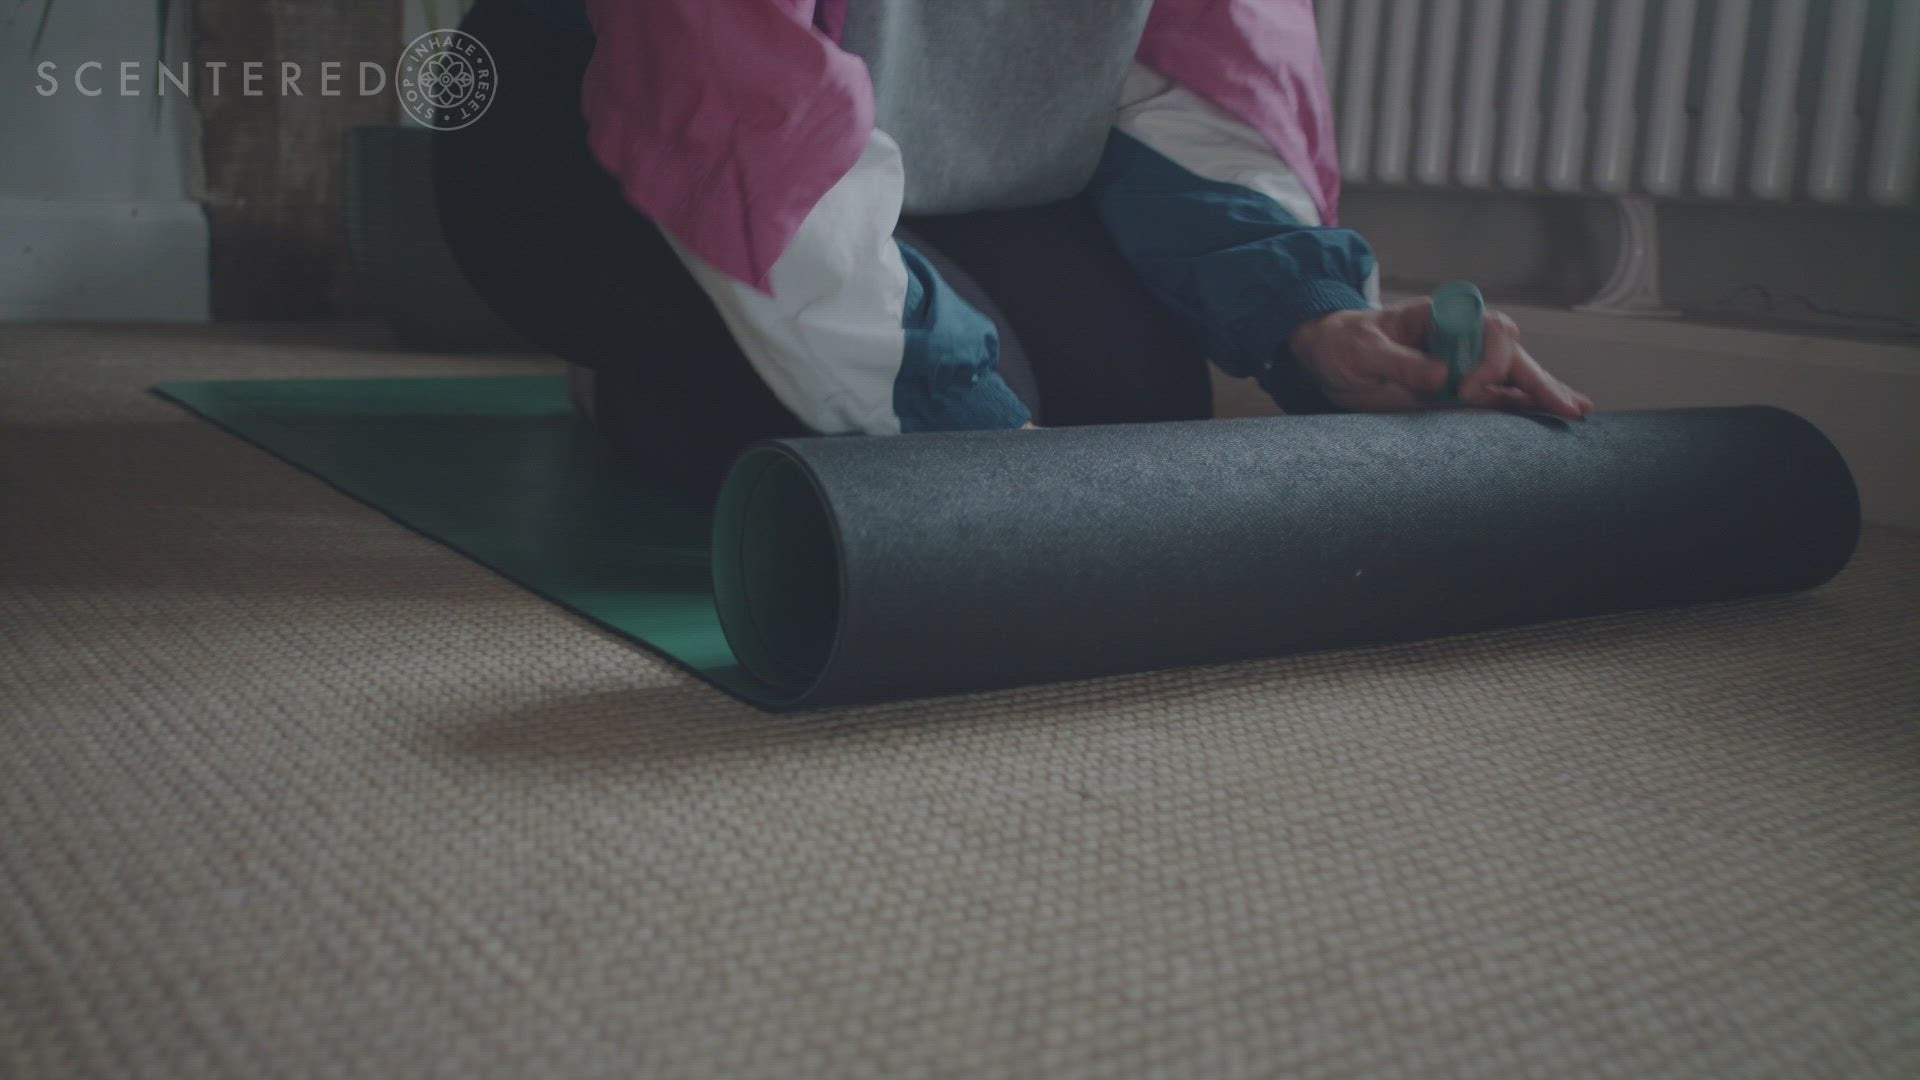 Video shows a girl dressed in relaxed clothing rolling out a yoga mat .  Then sitting on the yoga mat to apply the balm, she applies the Scentered Escape Relaxation balm to her wrist, stops for a moment to inhale the notes of the essential oils Oud, Frankincense and Cedar Wood and resets herself and the Scentered Escape Relaxation balm on the mat.   The Scentered logo including the words Scentered and Stop, Inhale, Reset; then appears to finish the video.